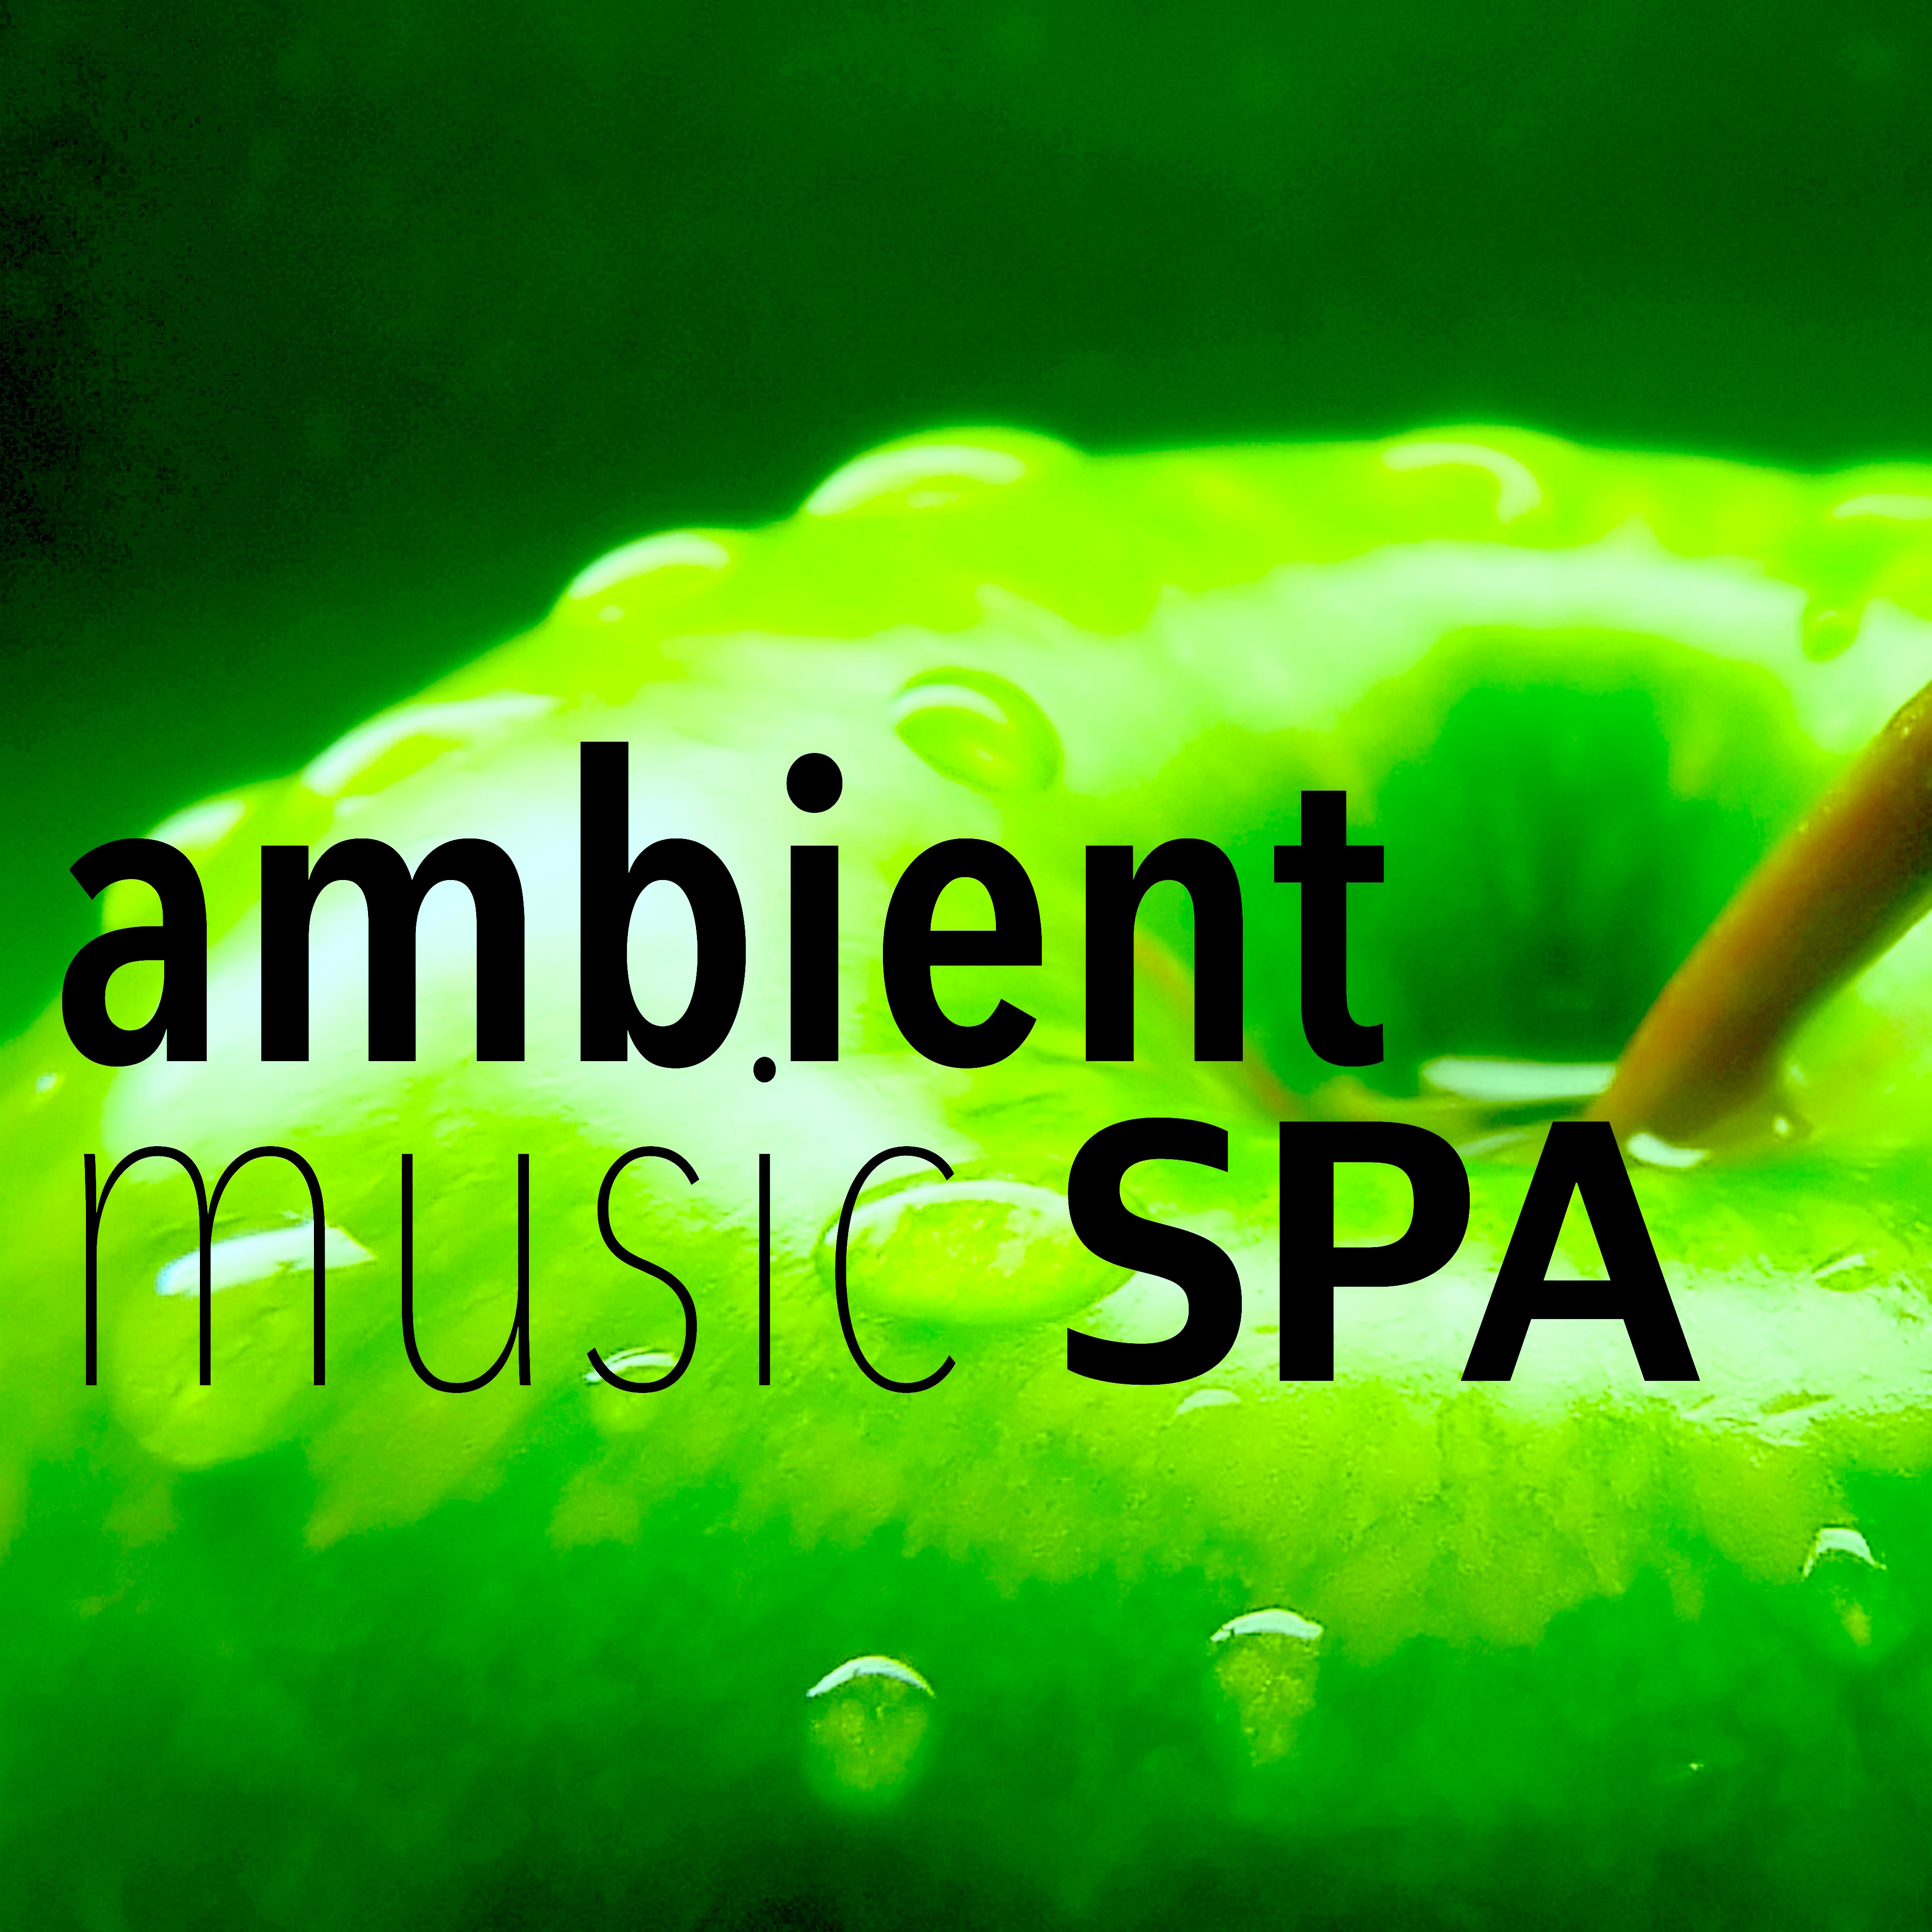 Ambient Music Spa - Collection 2016: Spa Background for Massage, Detox Sauna, Relaxation and Meditation, Chillout & Chillax for Relax and Drink Green Tea